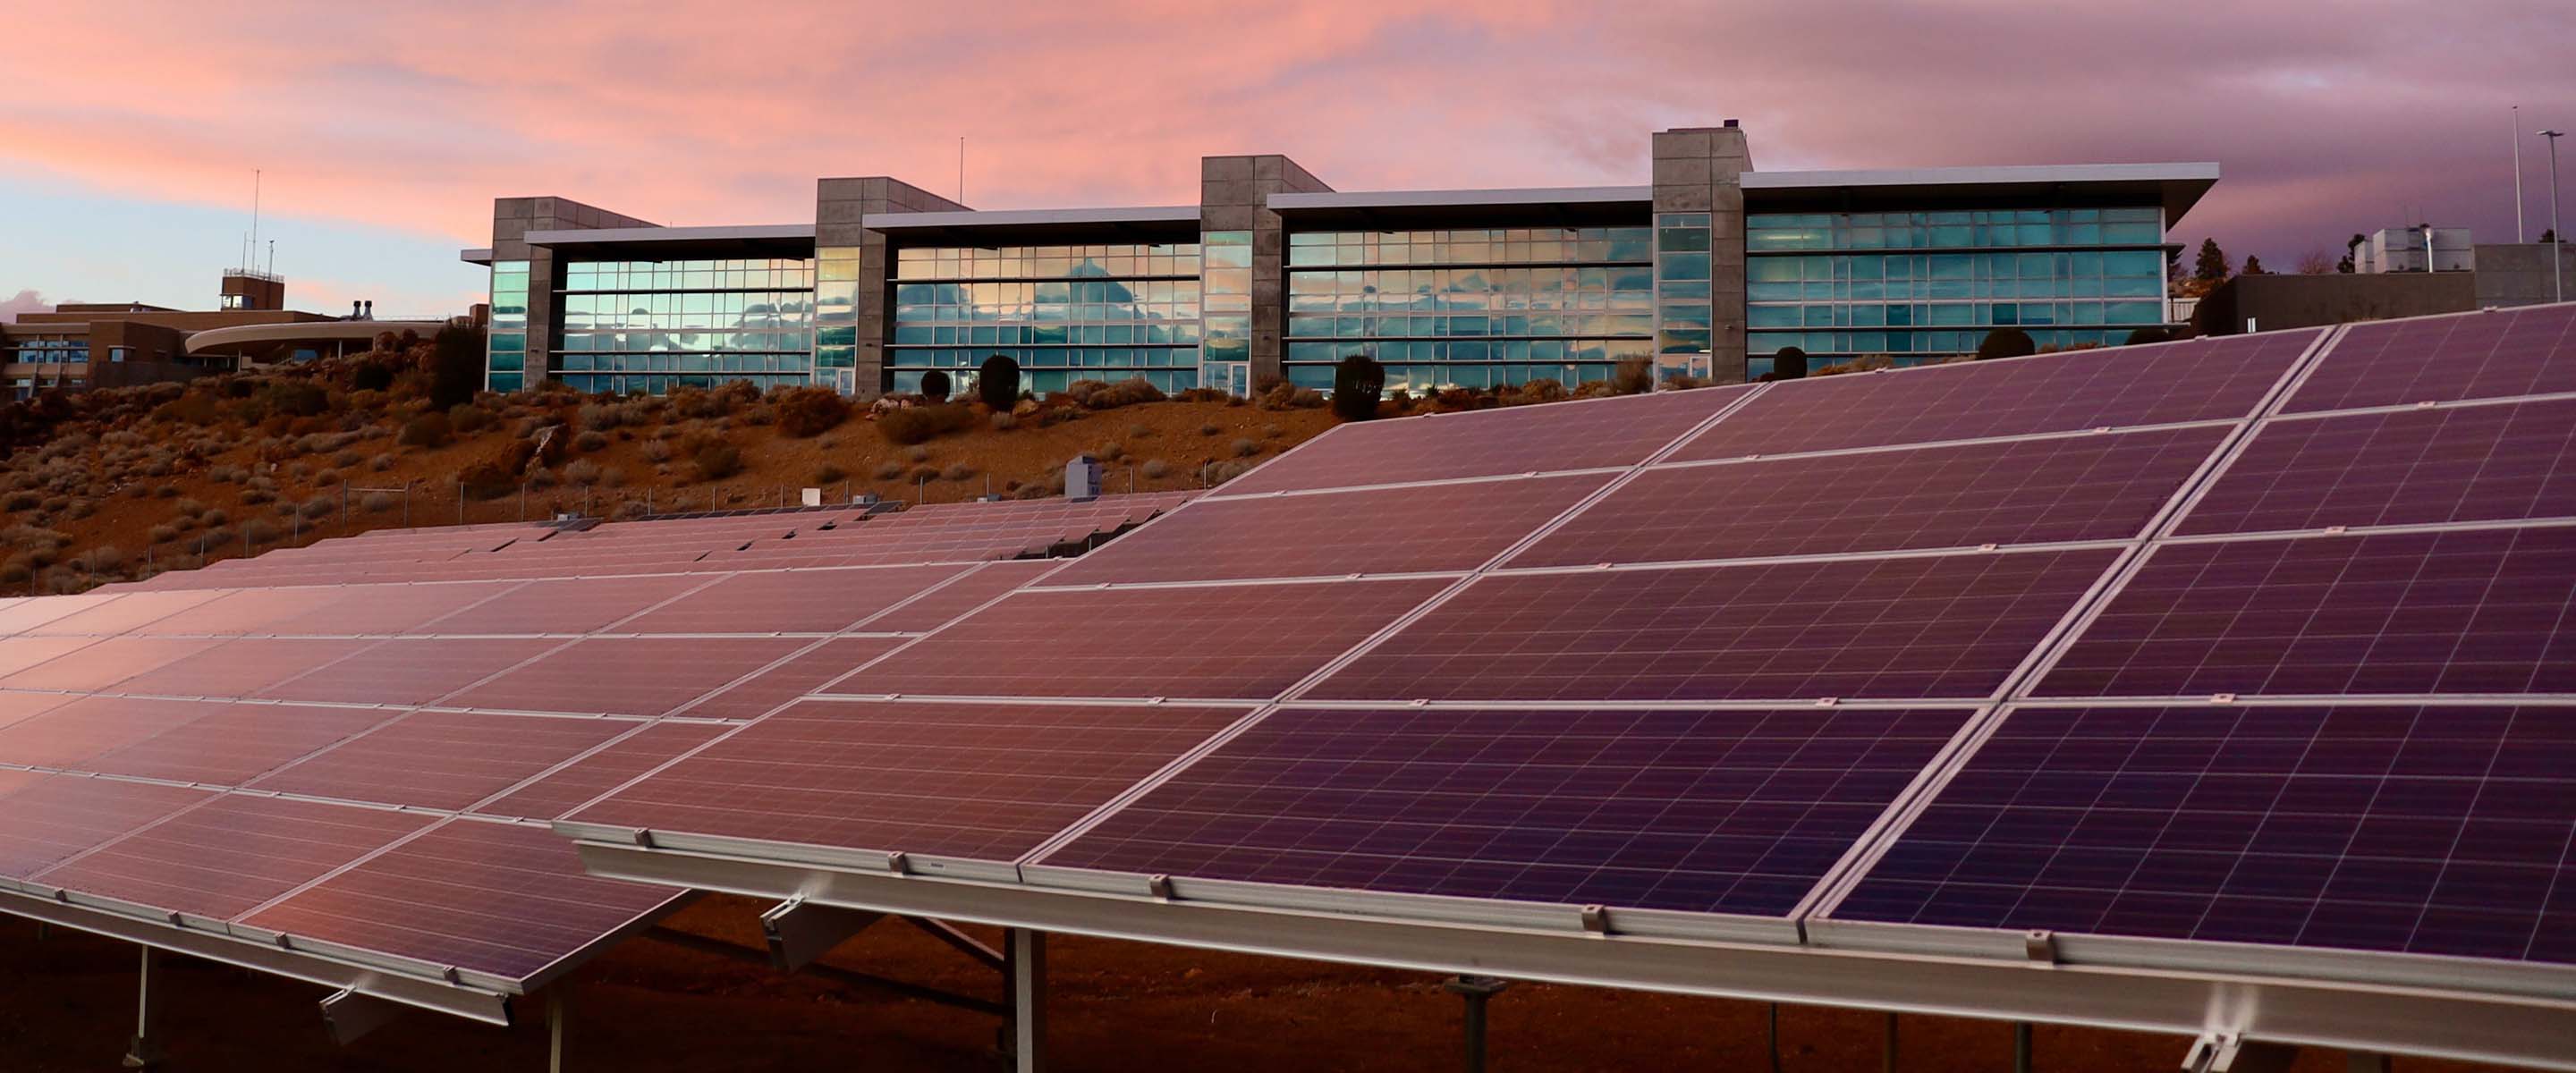 Solar panels installed at the DRI institute is an example of insetting.